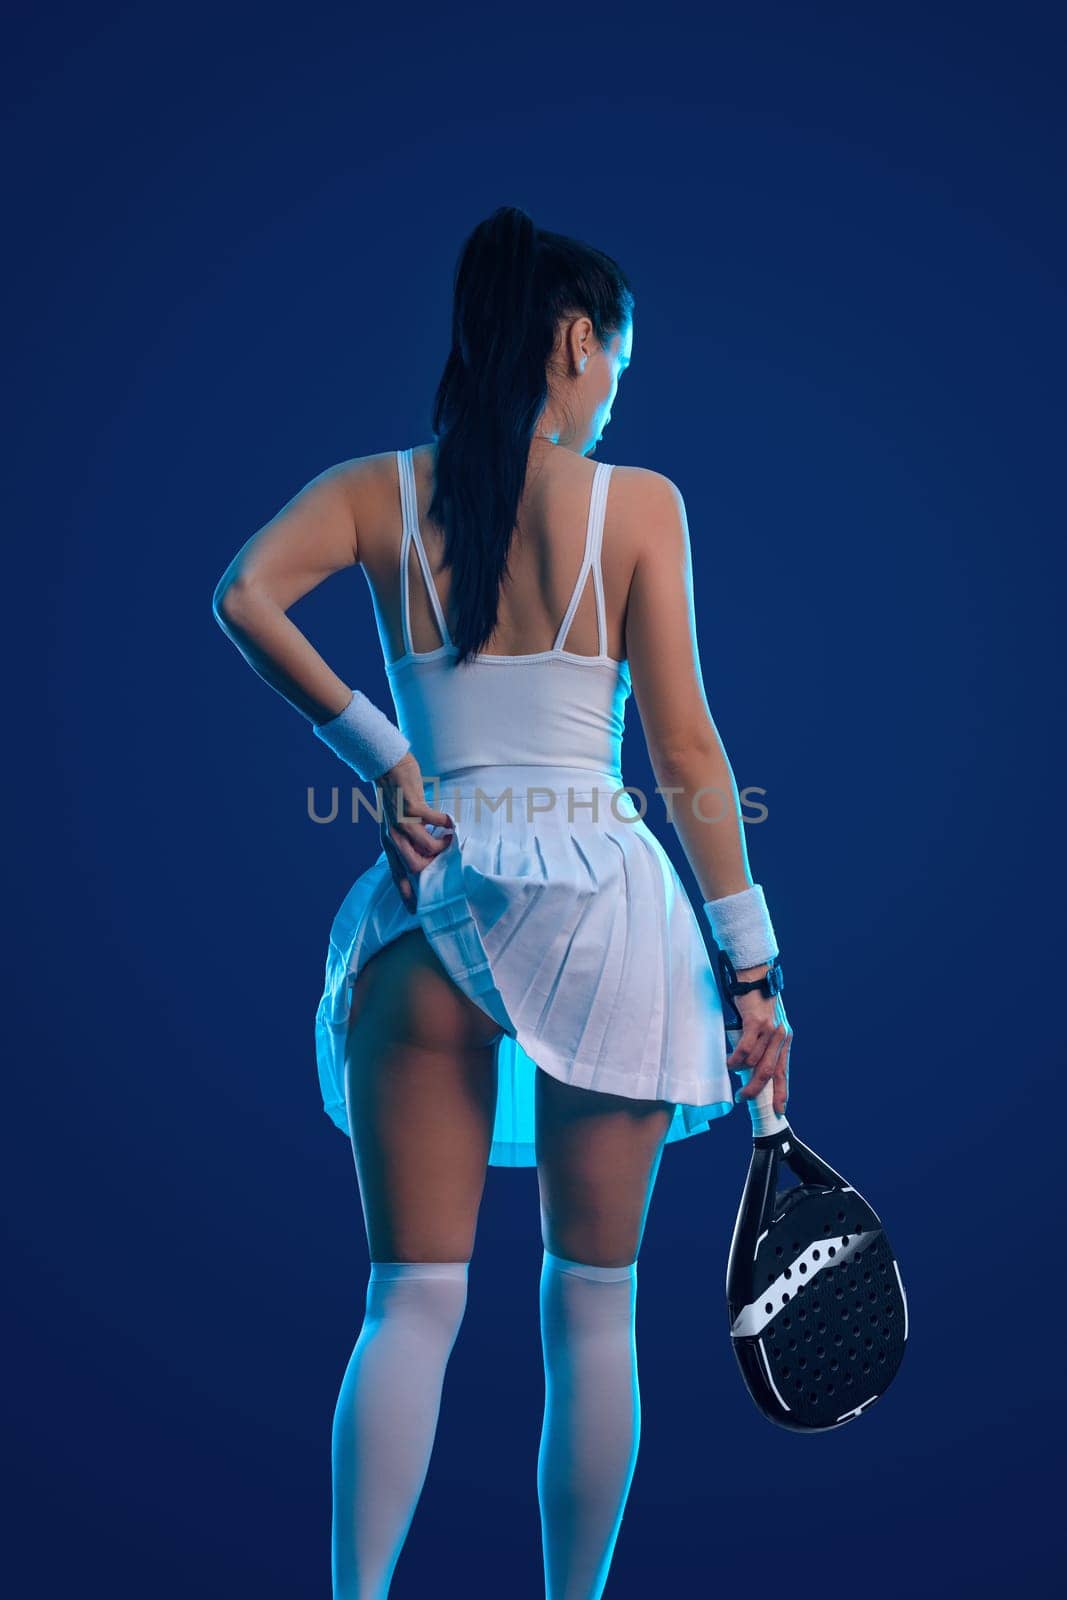 Padel tennis player with racket. Girl teenager athlete with racket on court with neon colors. Sport concept. Download a high quality photo for the design of a sports app or betting site